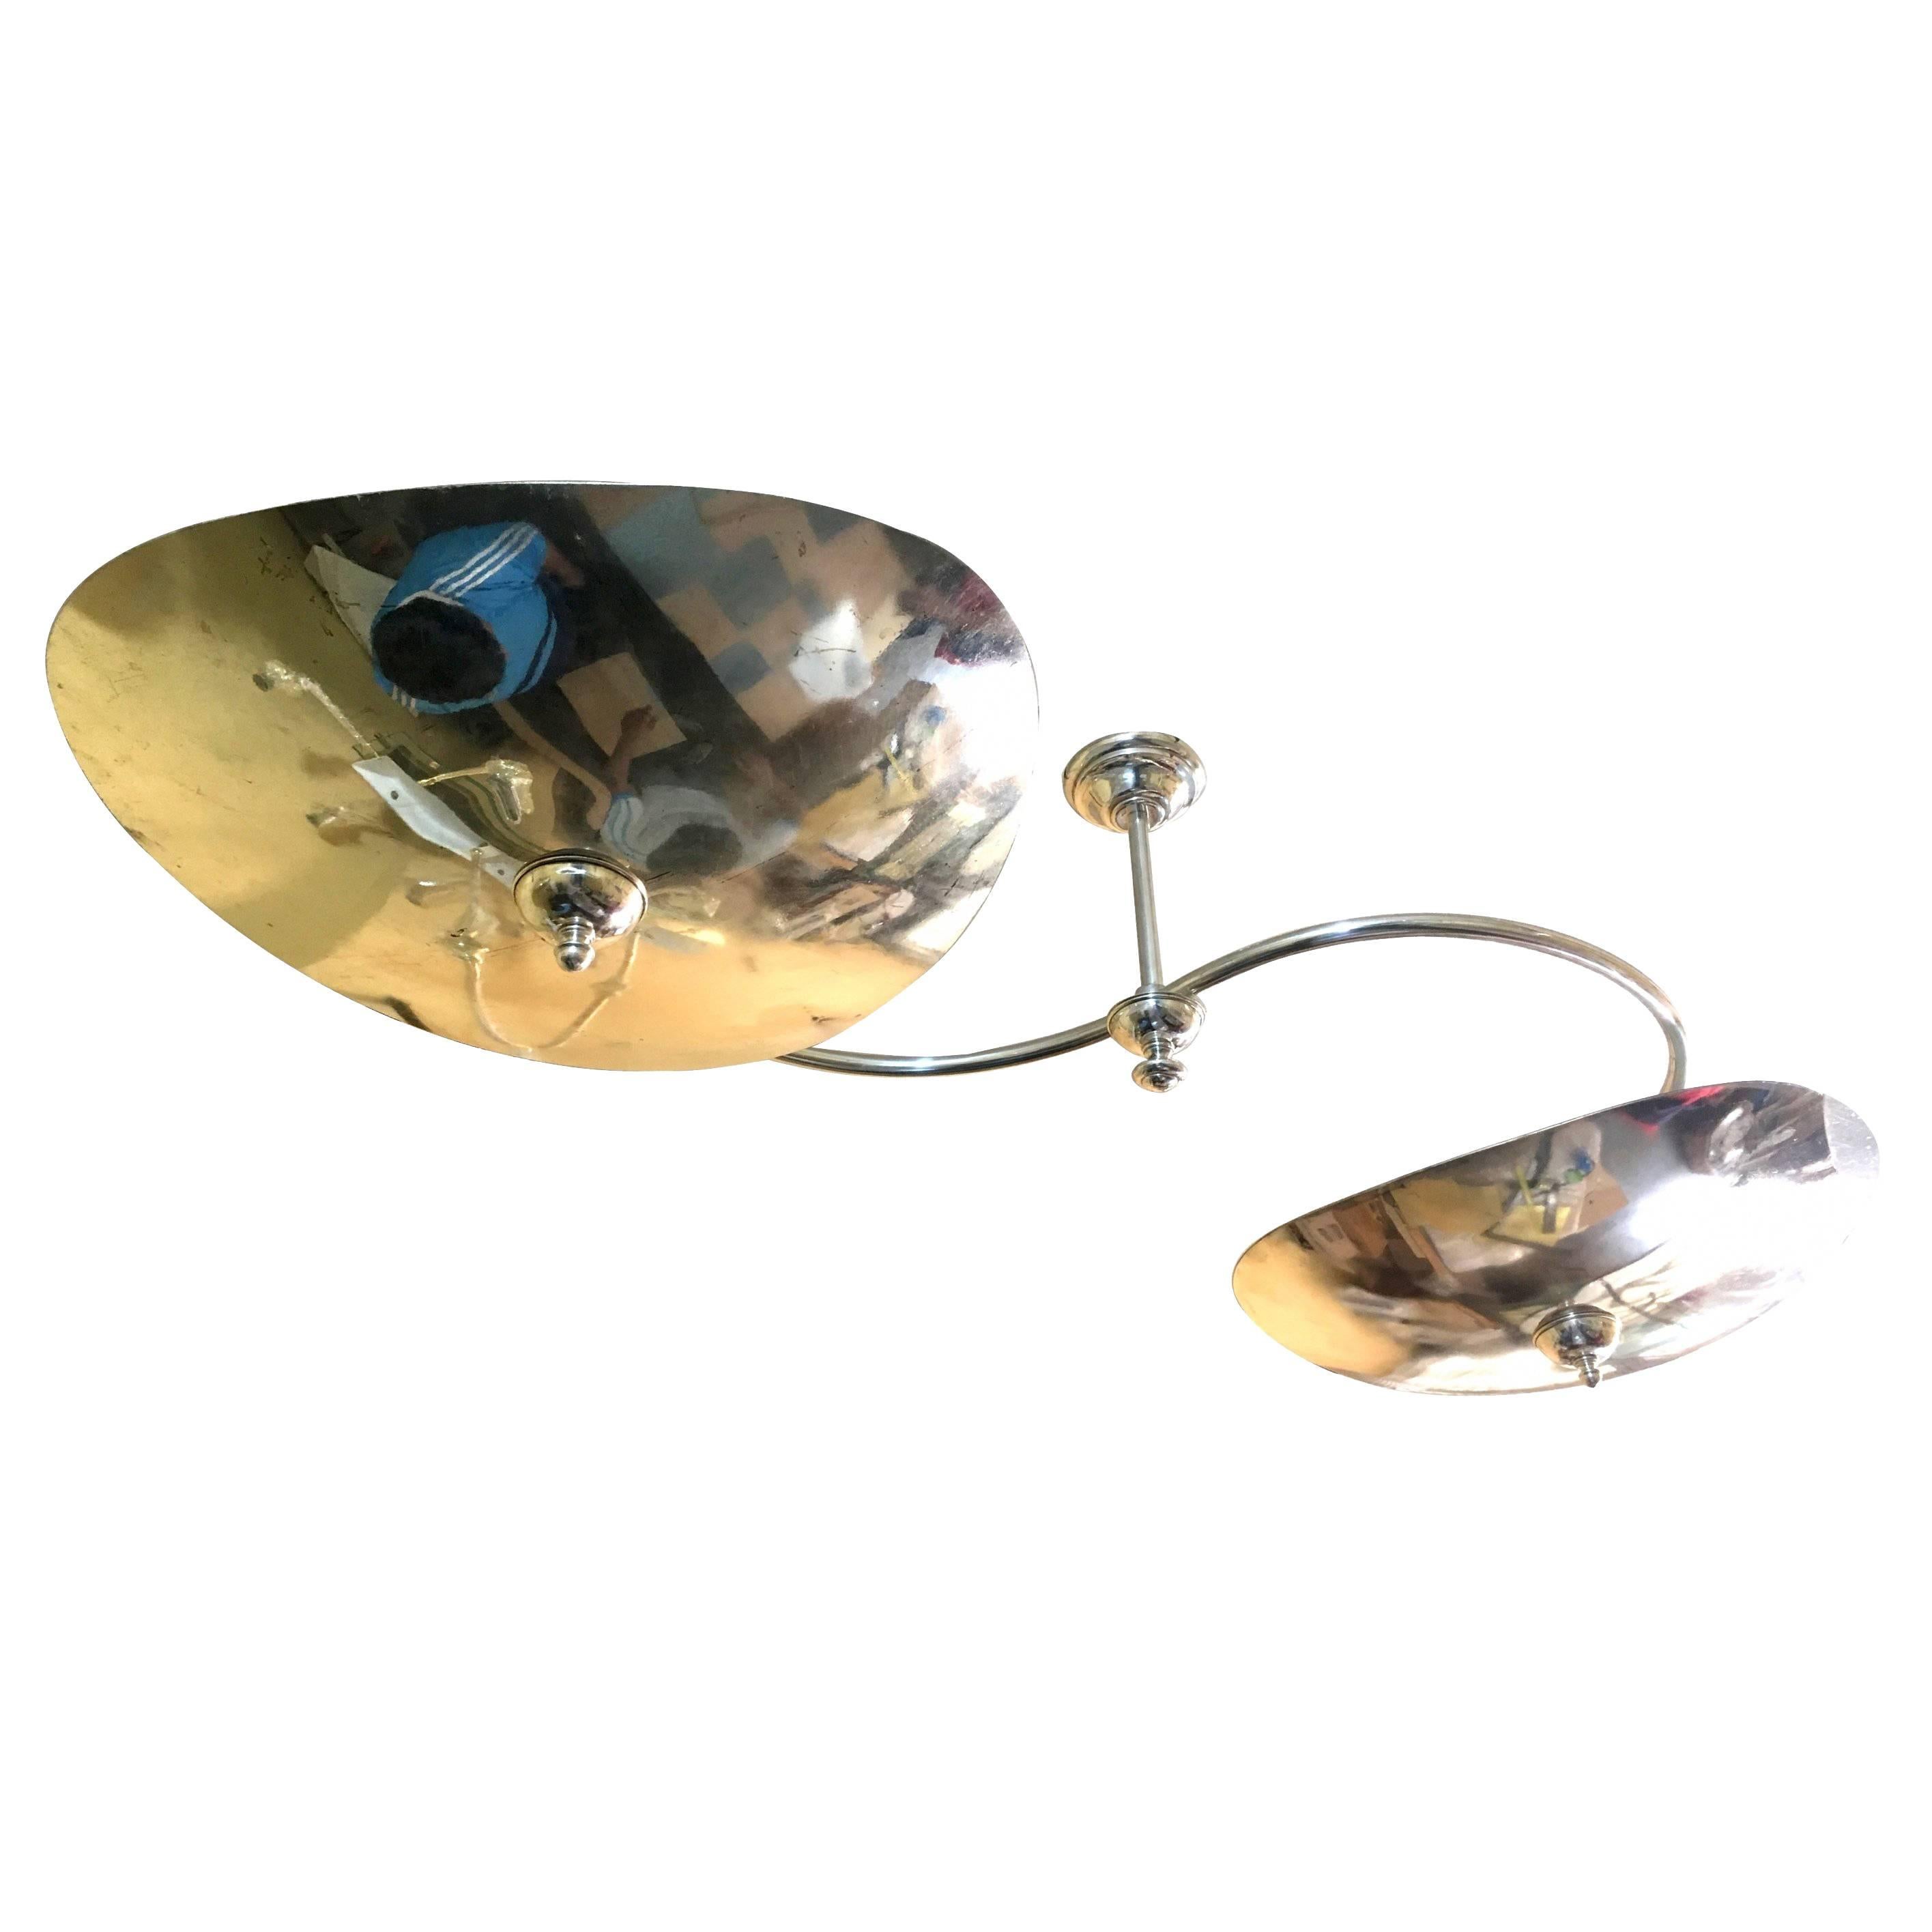 Moderne Italian Nickel-Plated Light Fixture For Sale